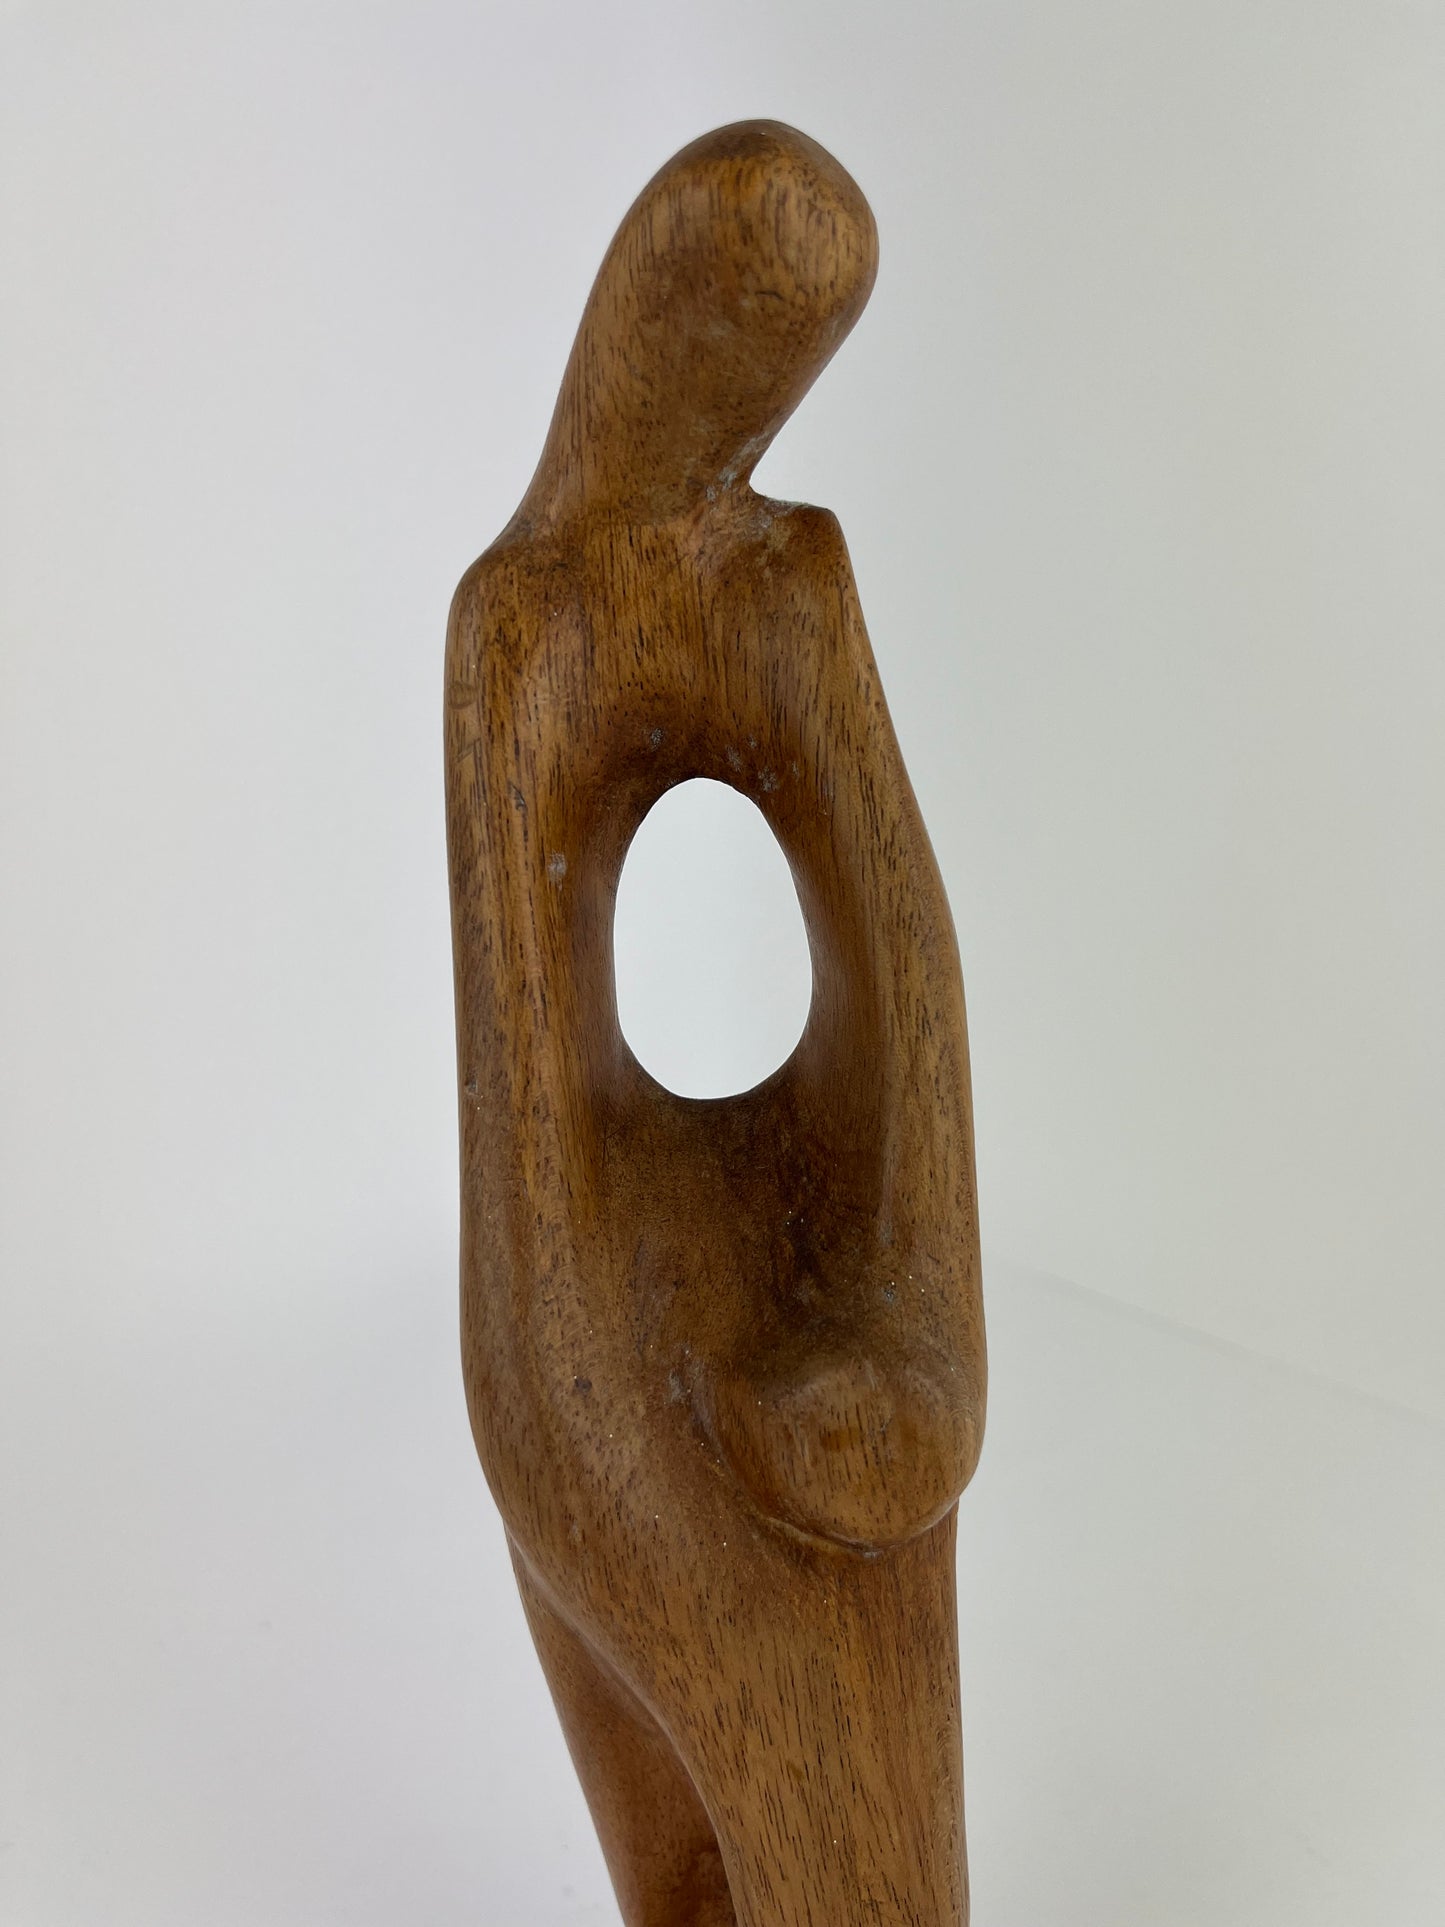 CARVED PARENT AND CHILD WOODEN SCULPTURE